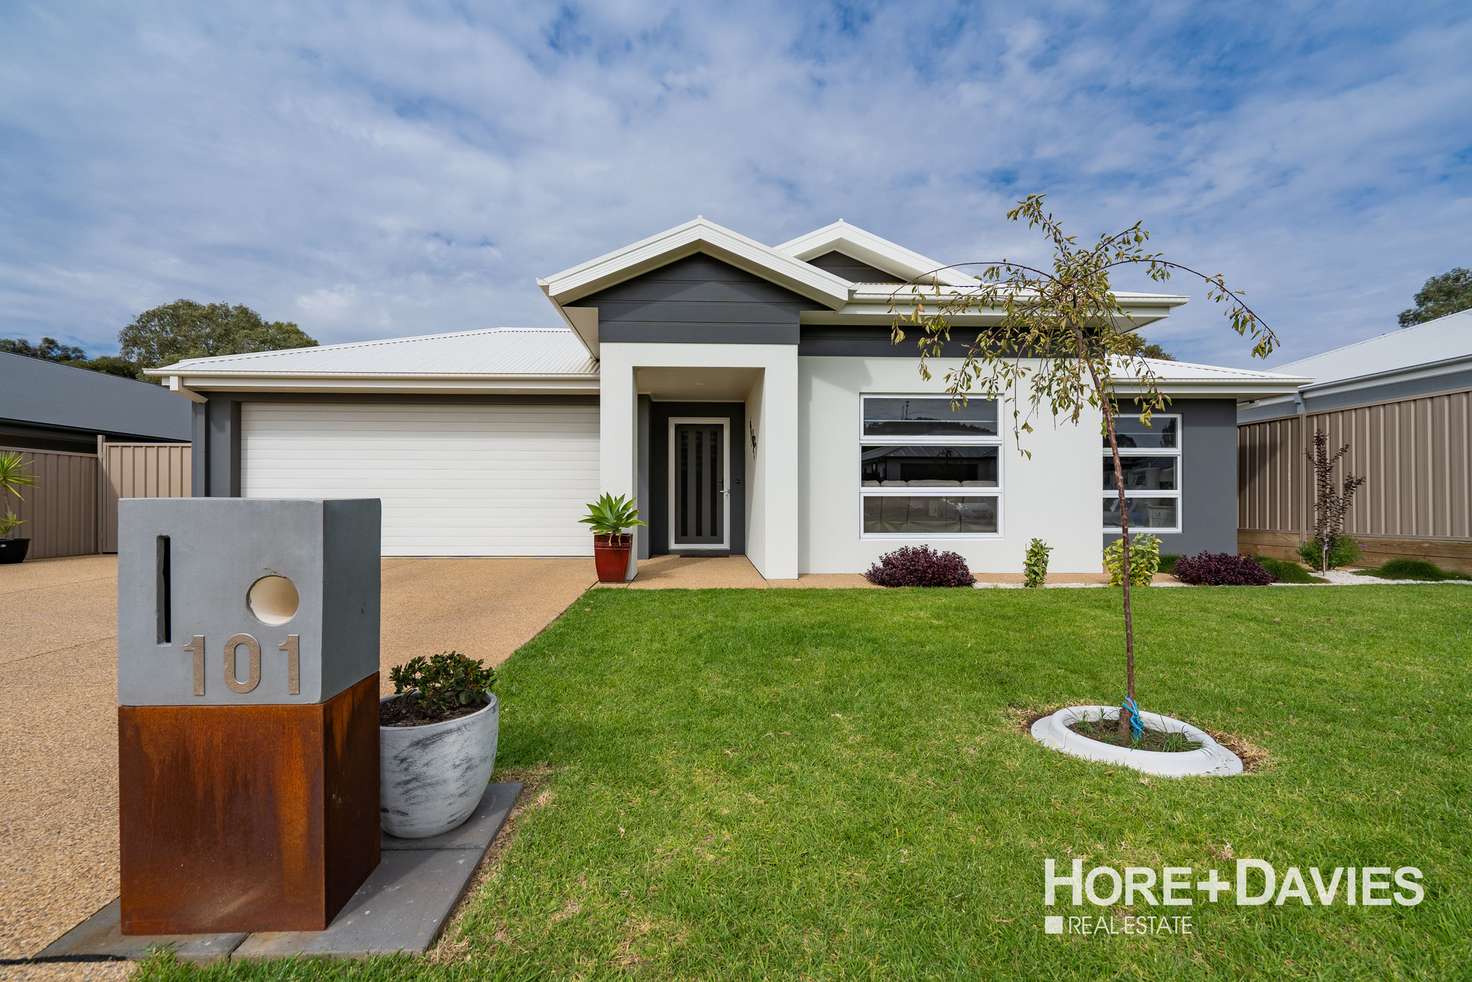 Main view of Homely house listing, 101 Messenger Avenue, Boorooma NSW 2650